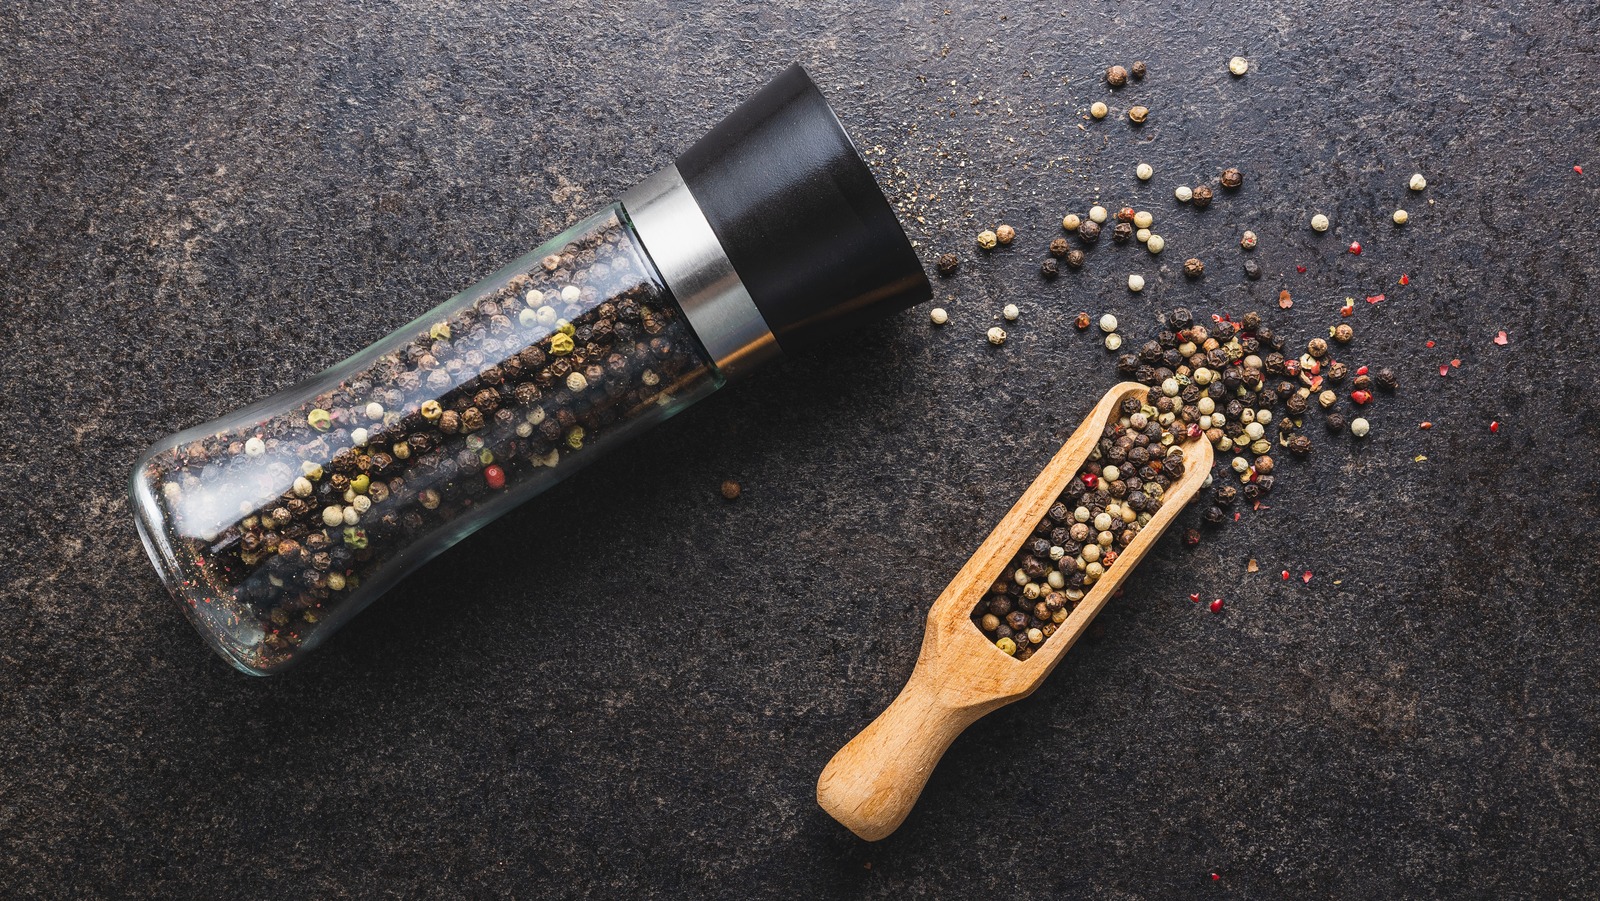 https://www.thedailymeal.com/img/gallery/dont-skip-this-step-when-refilling-your-pepper-mill/l-intro-1671220112.jpg